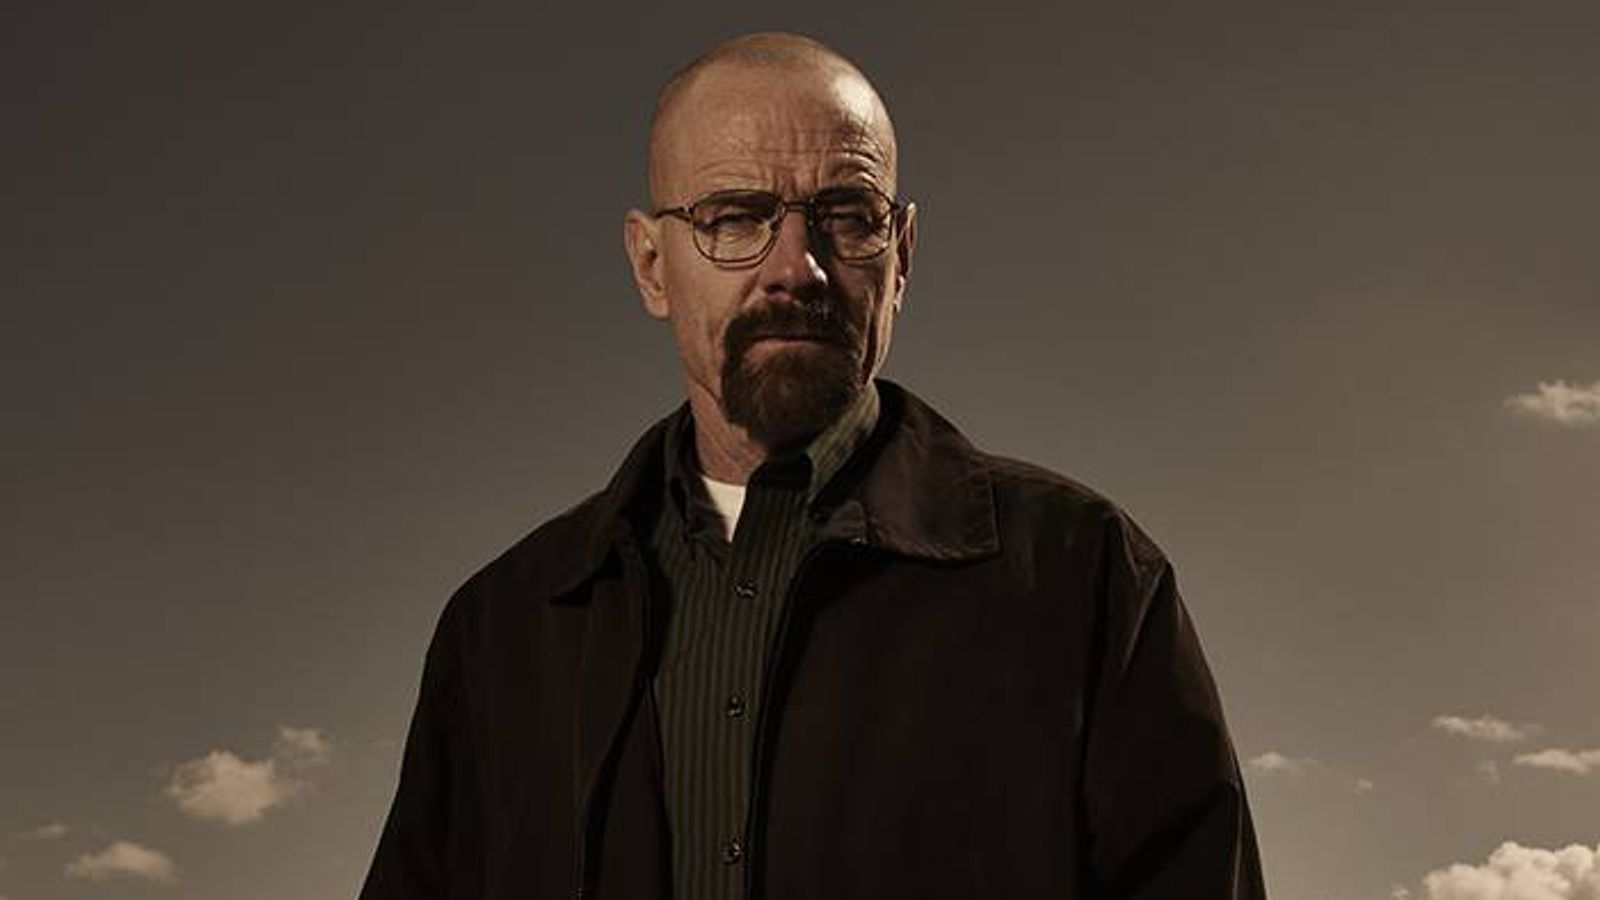 Breaking Bad Walter White Actor Bryan Cranstons Underwear Expected To Fetch Up To 5k At